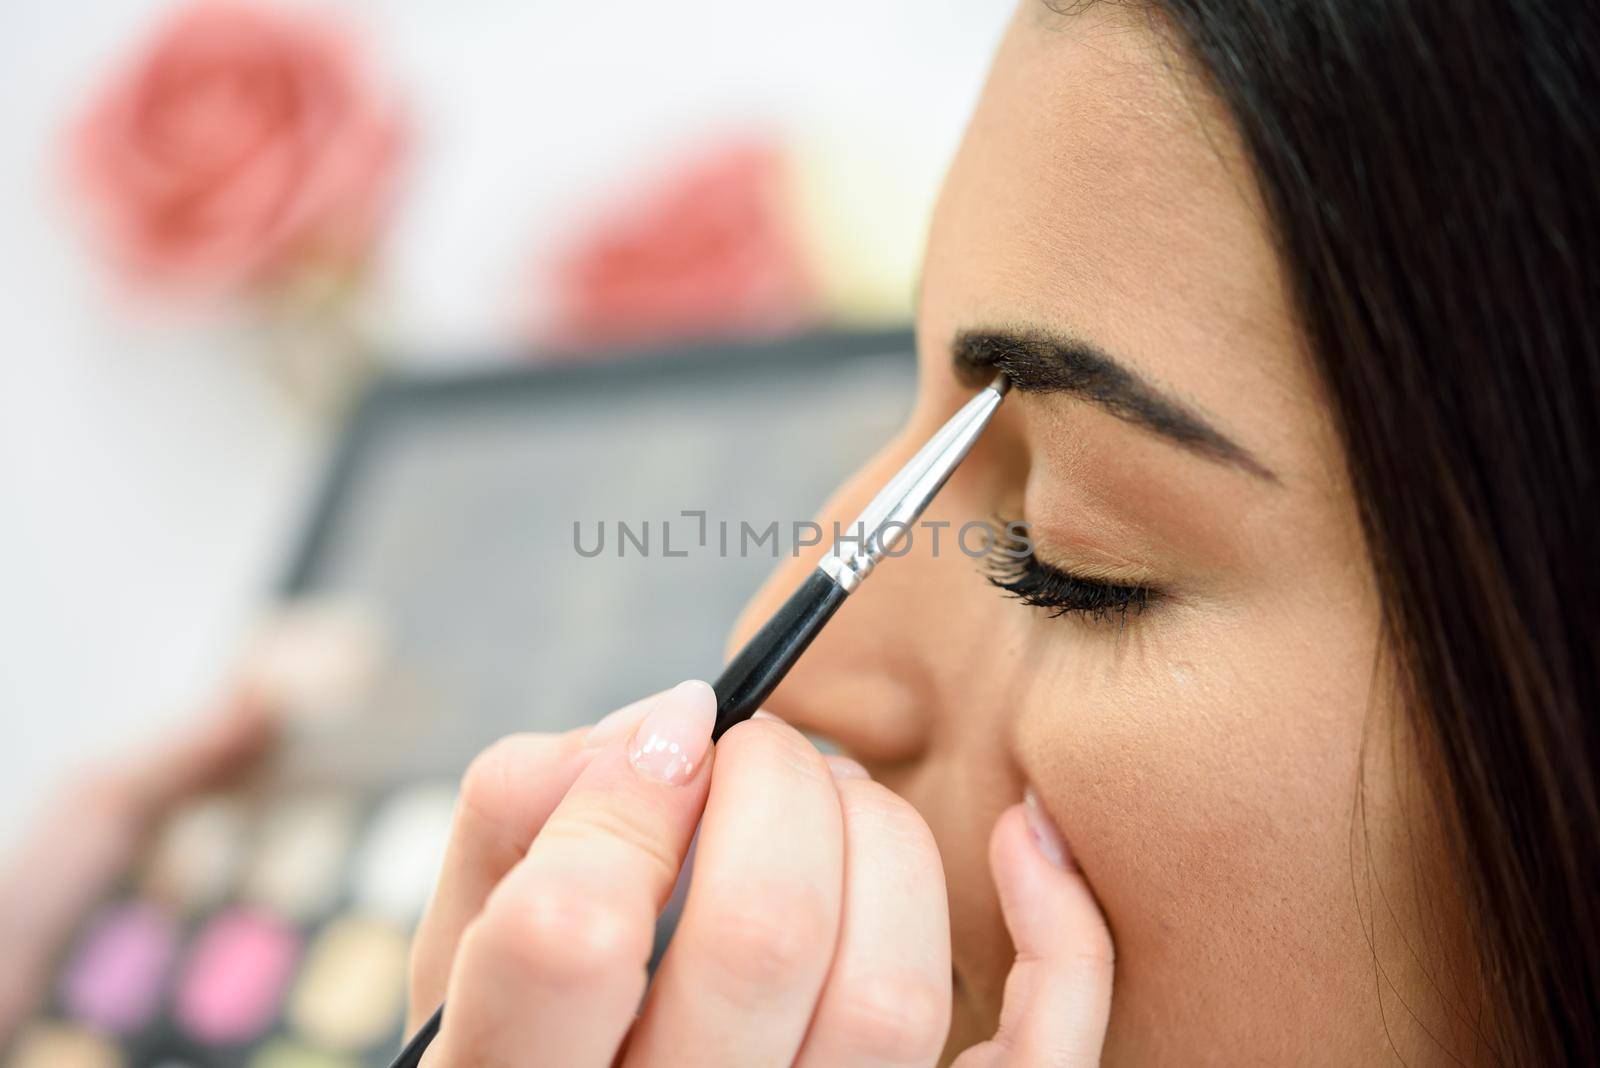 Makeup artist putting make-up on an woman's eyebrows by javiindy